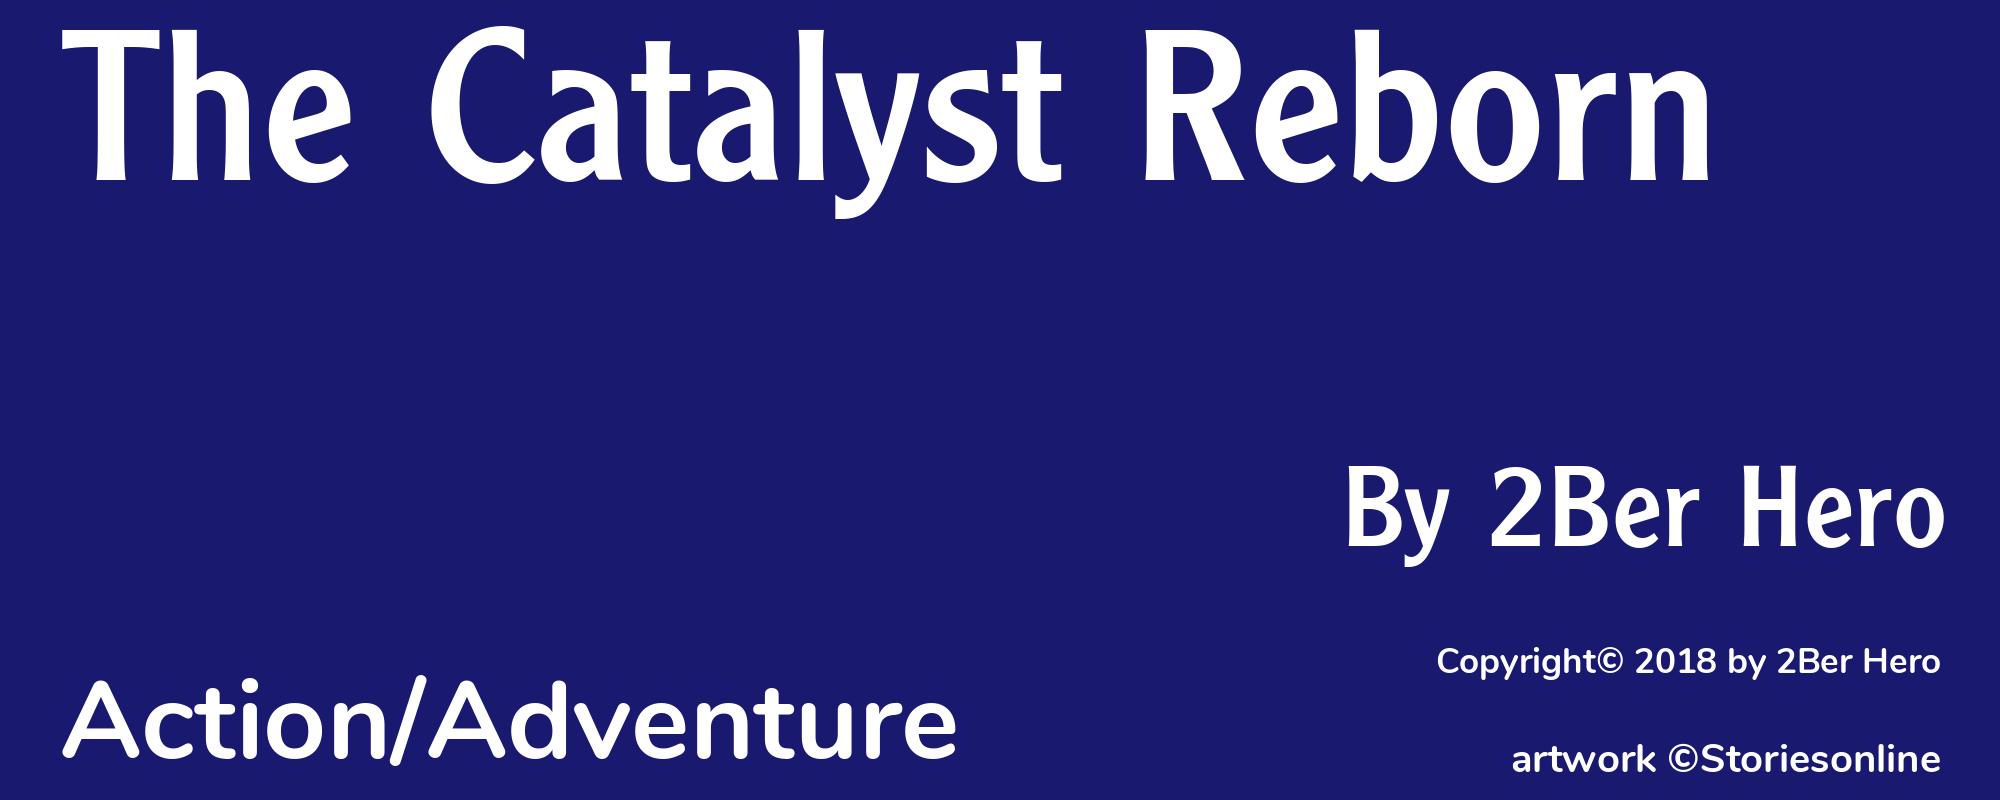 The Catalyst Reborn - Cover